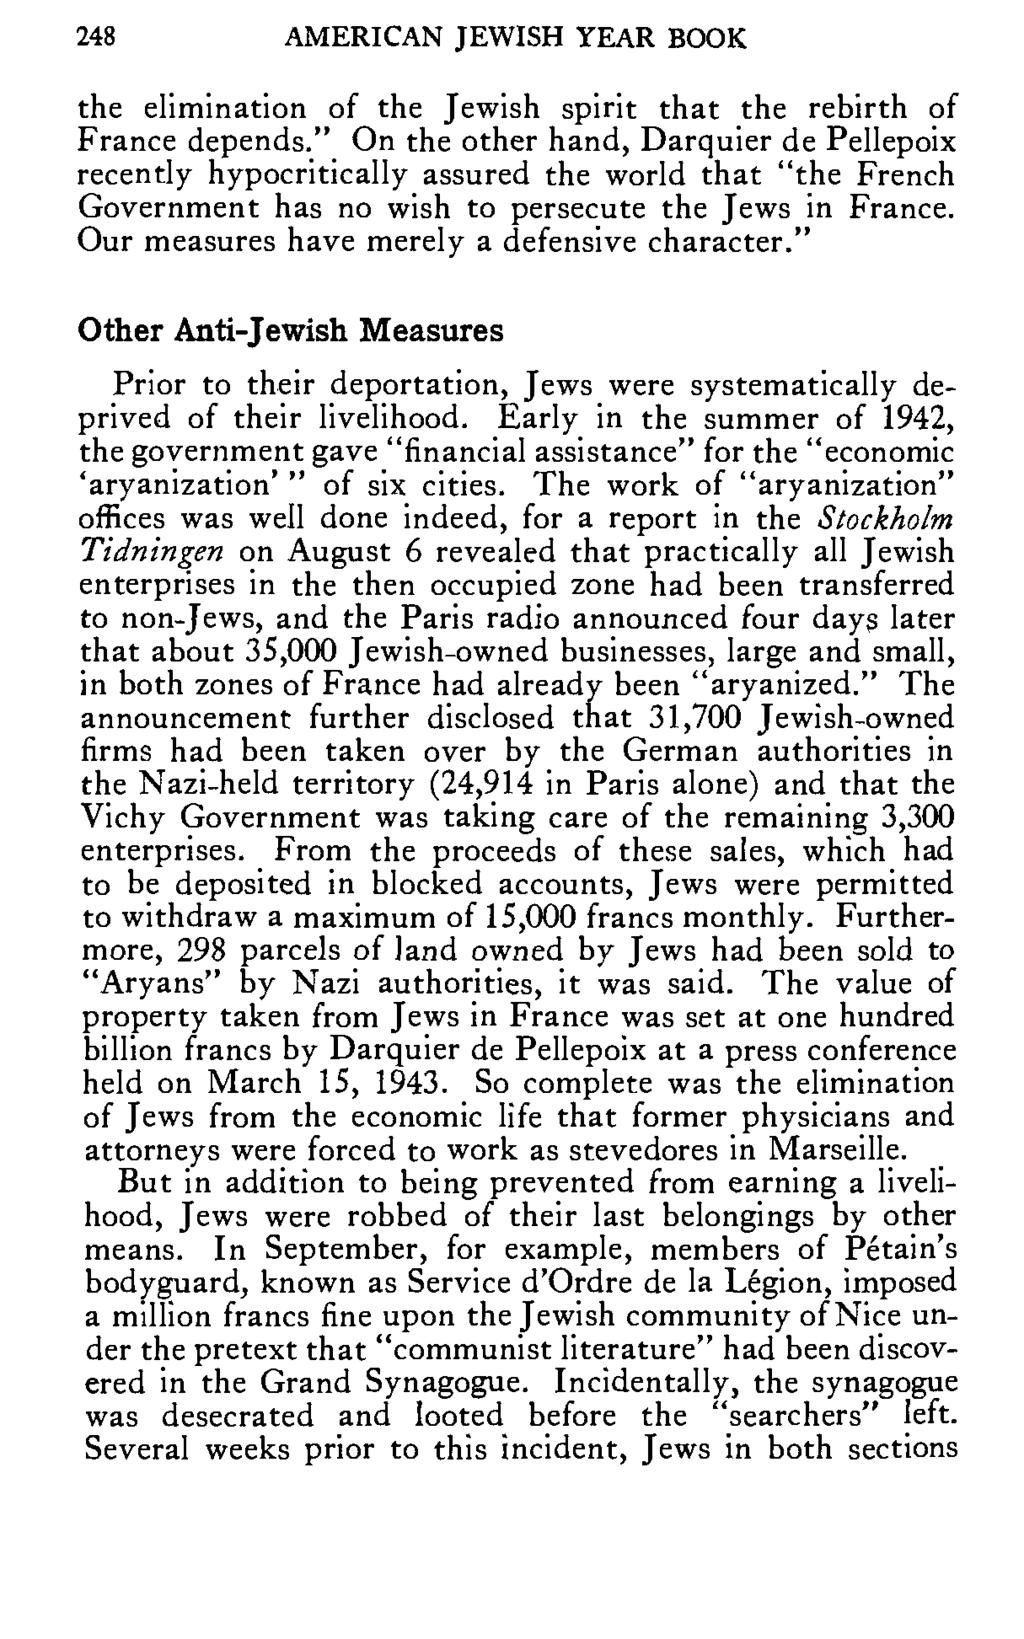 248 AMERICAN JEWISH YEAR BOOK the elimination of the Jewish spirit that the rebirth of France depends.